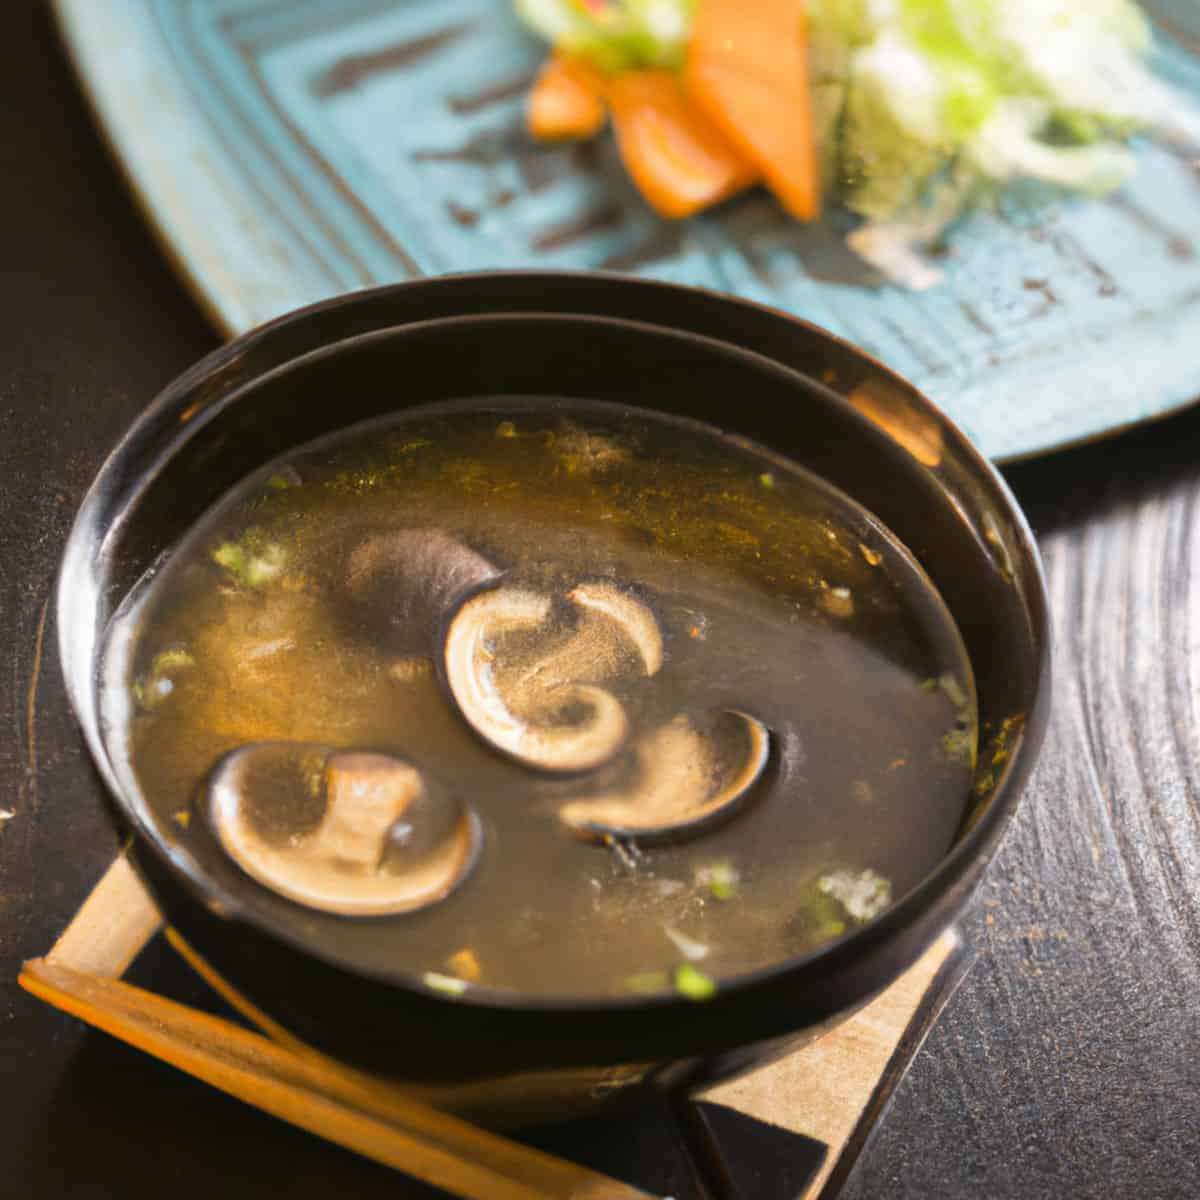 Hibachi Restaurant Soup Recipe- Your Perfect Appetizer for Any Meal